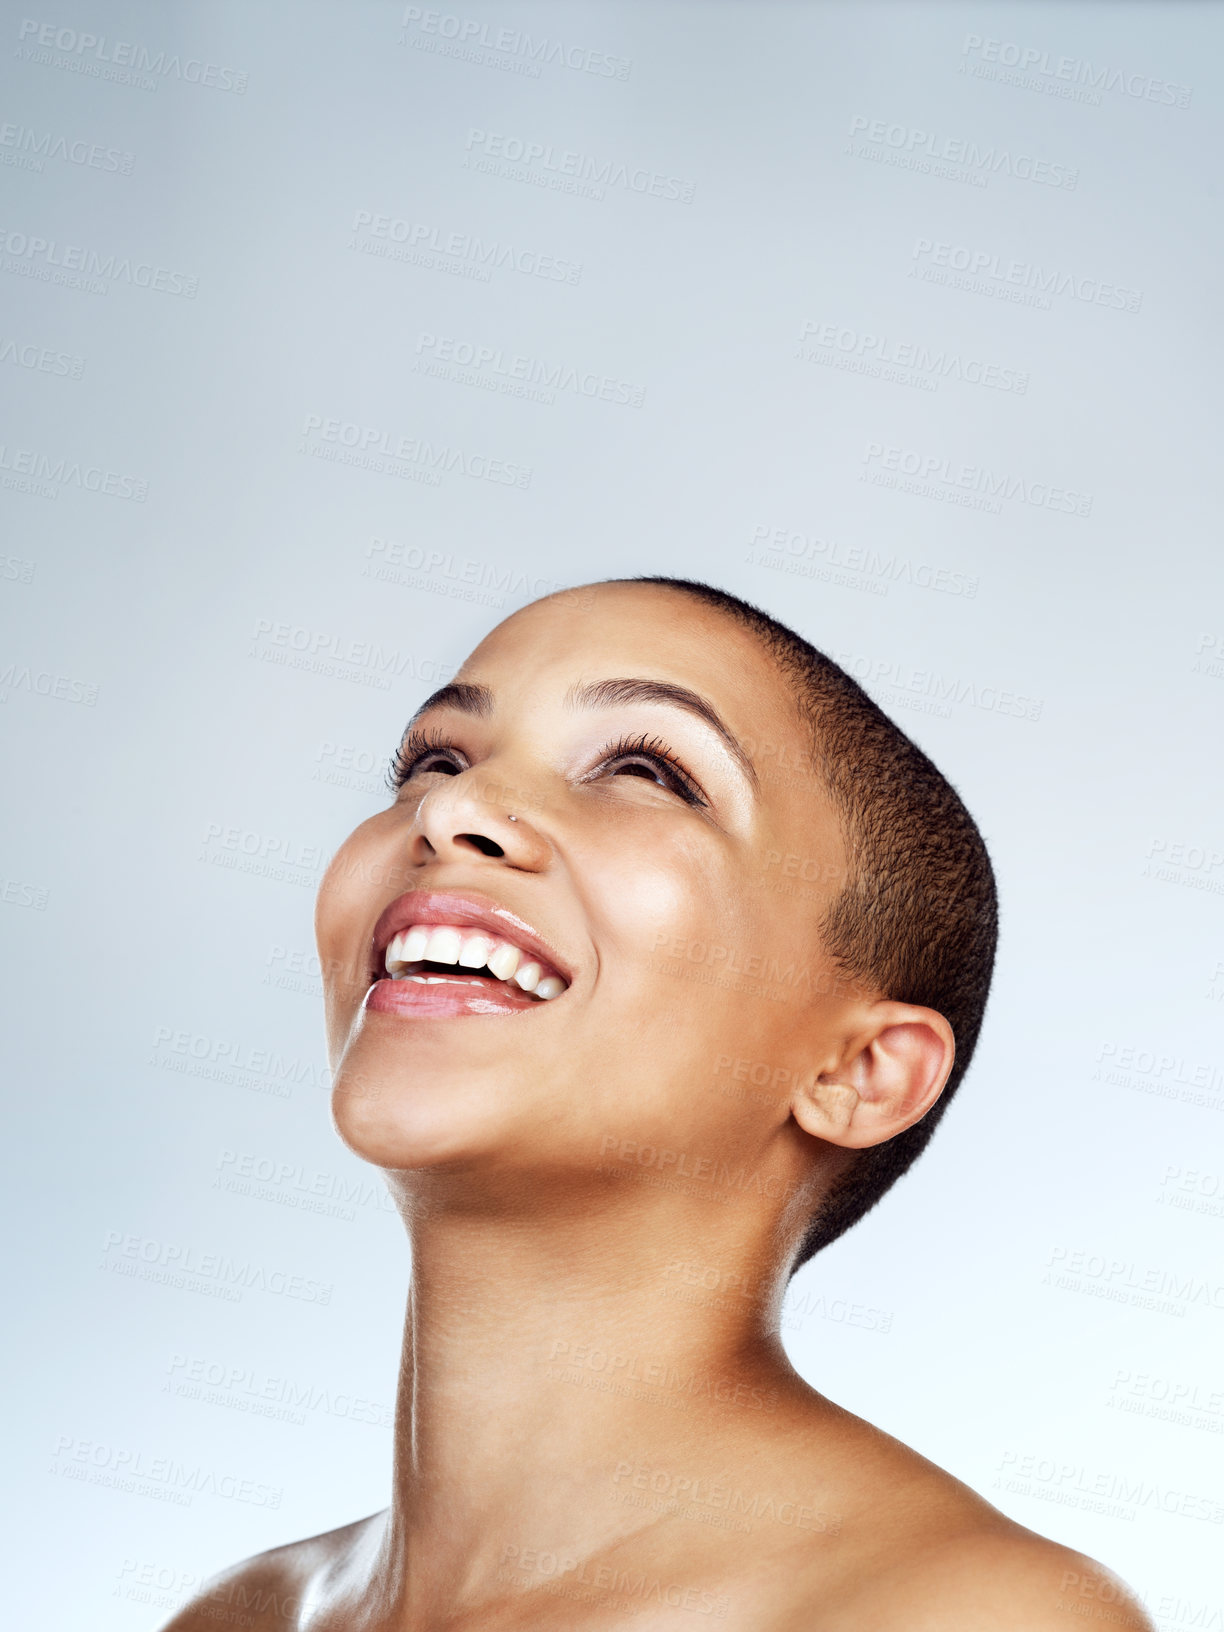 Buy stock photo Studio shot of a beautiful young woman smiling against a grey background